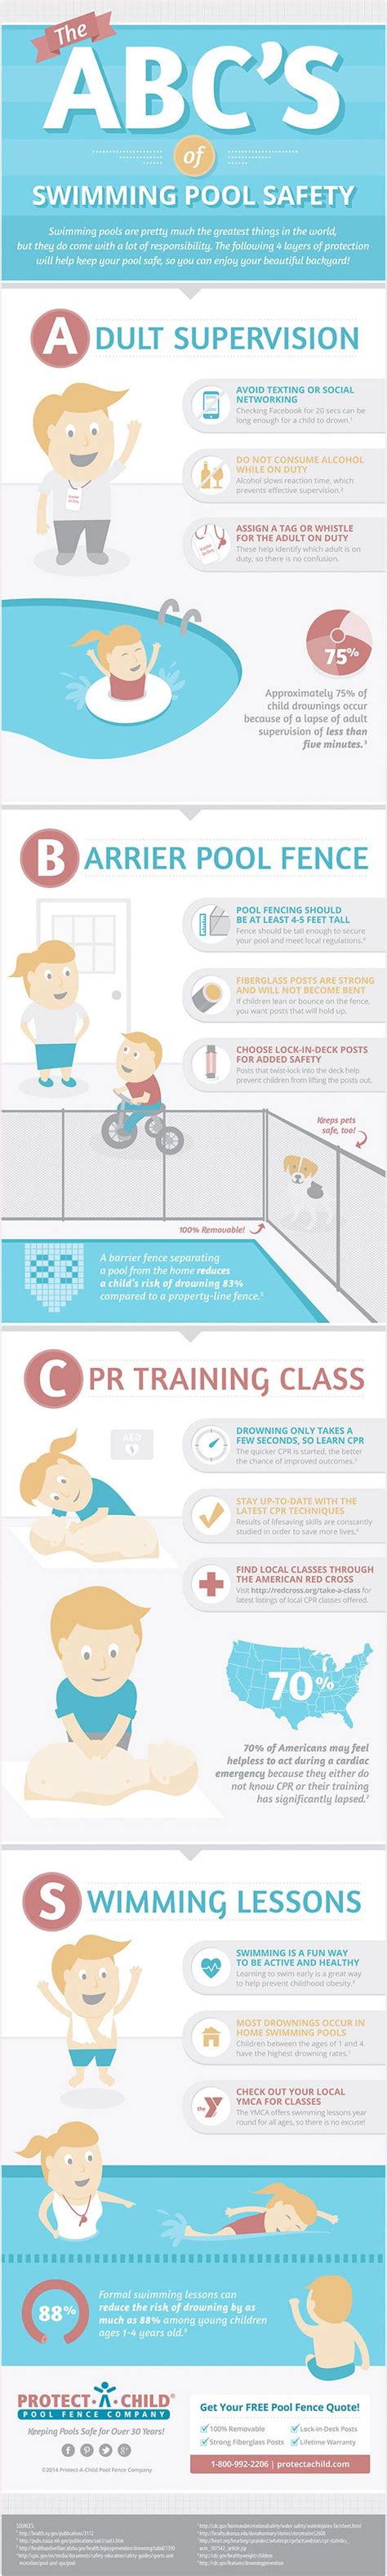 The Abcs Of Swimming Pool Safety Infographic Swimming